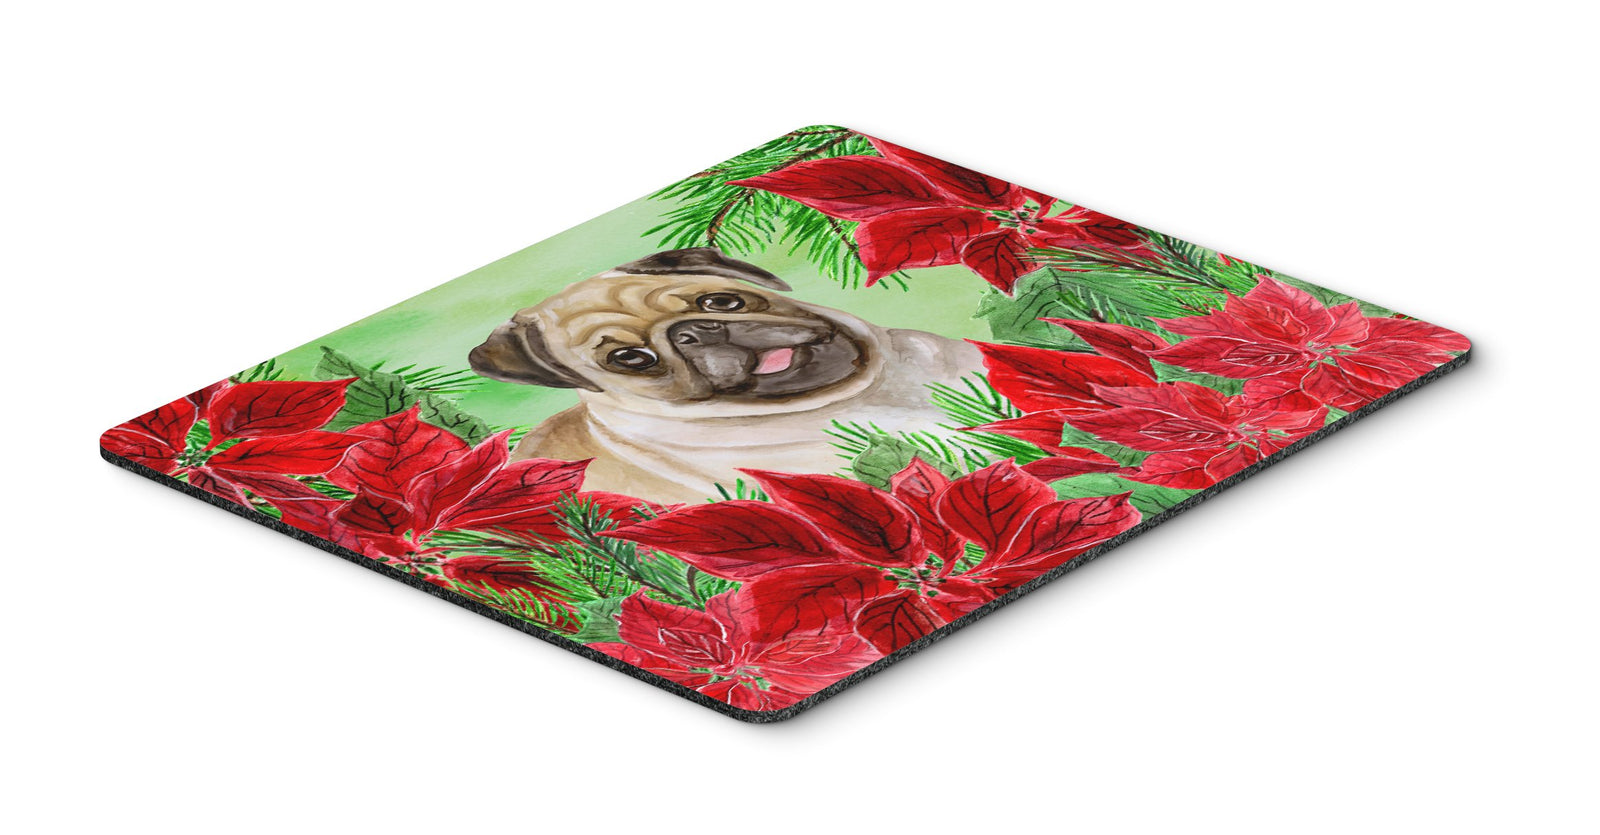 Fawn Pug Poinsettas Mouse Pad, Hot Pad or Trivet CK1365MP by Caroline's Treasures